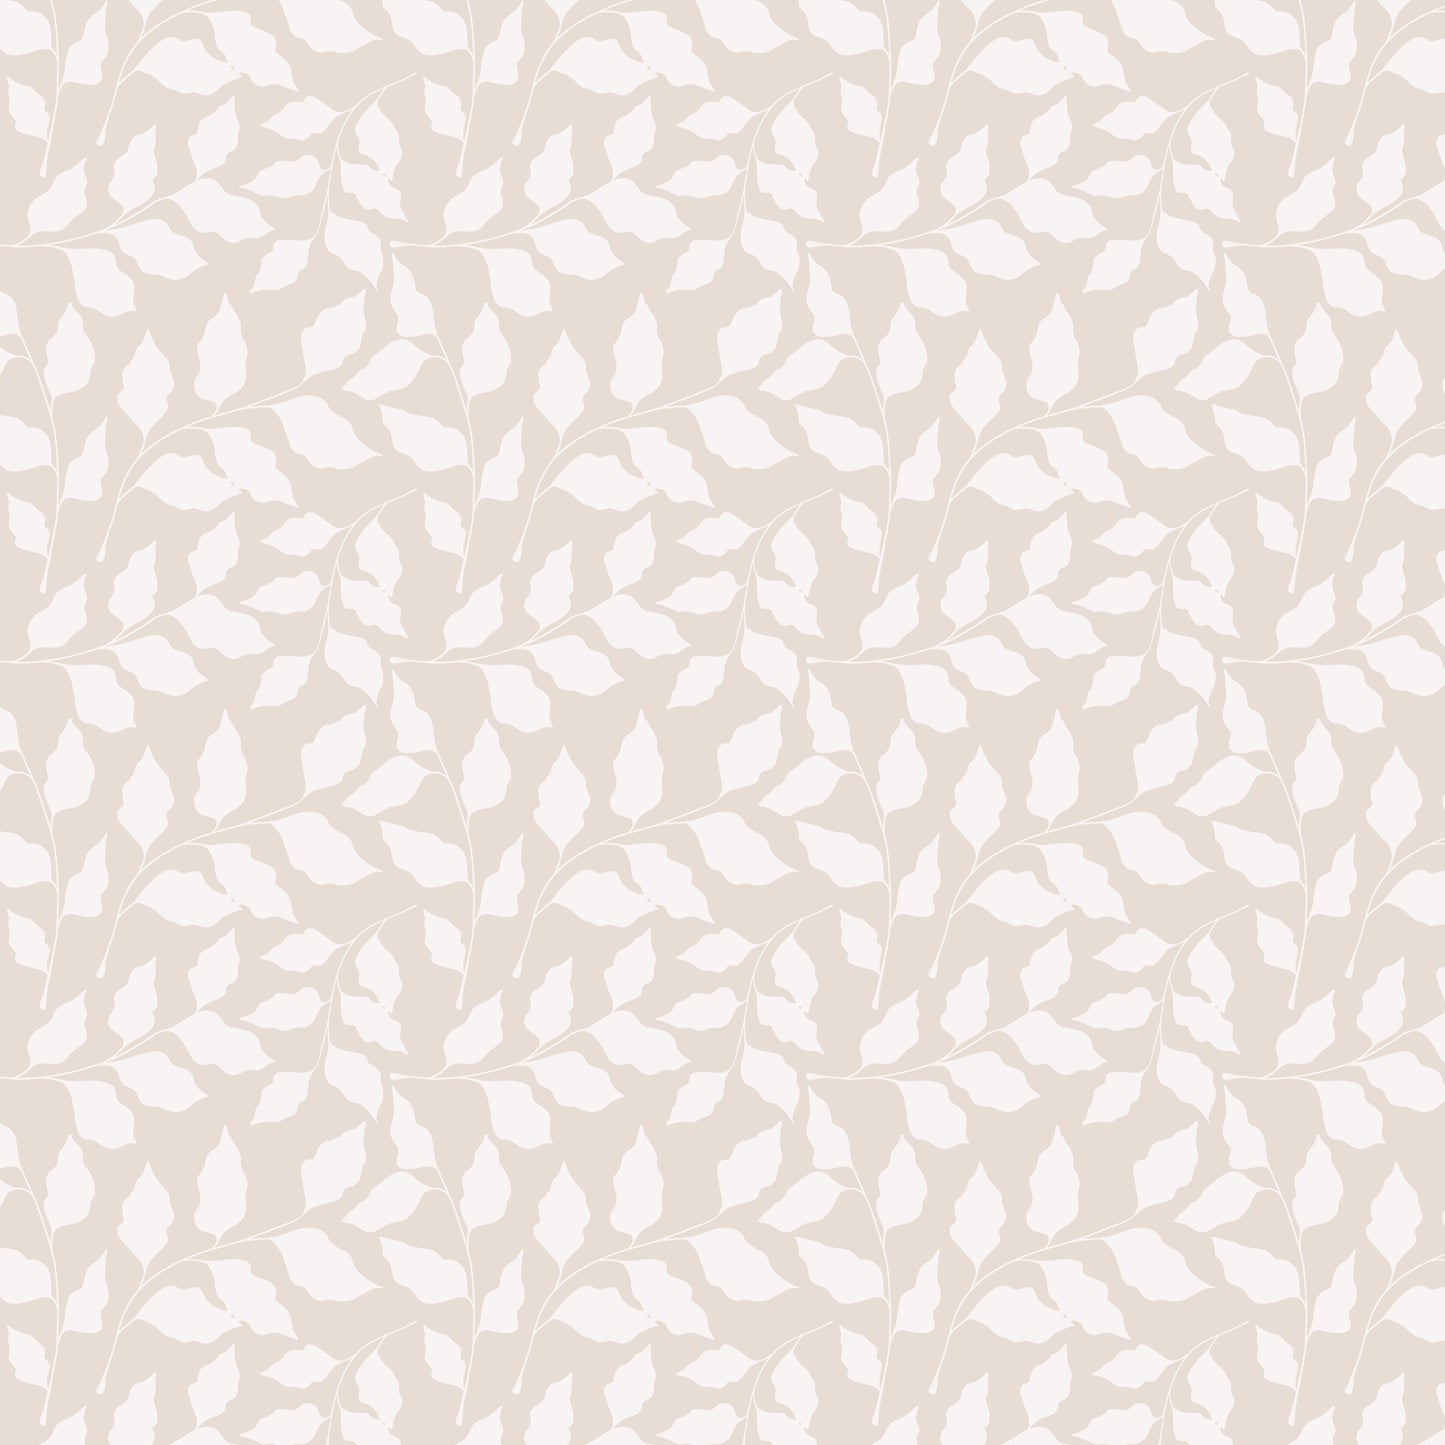 Eden Wallpaper (Taupe) from The Wynona Collection